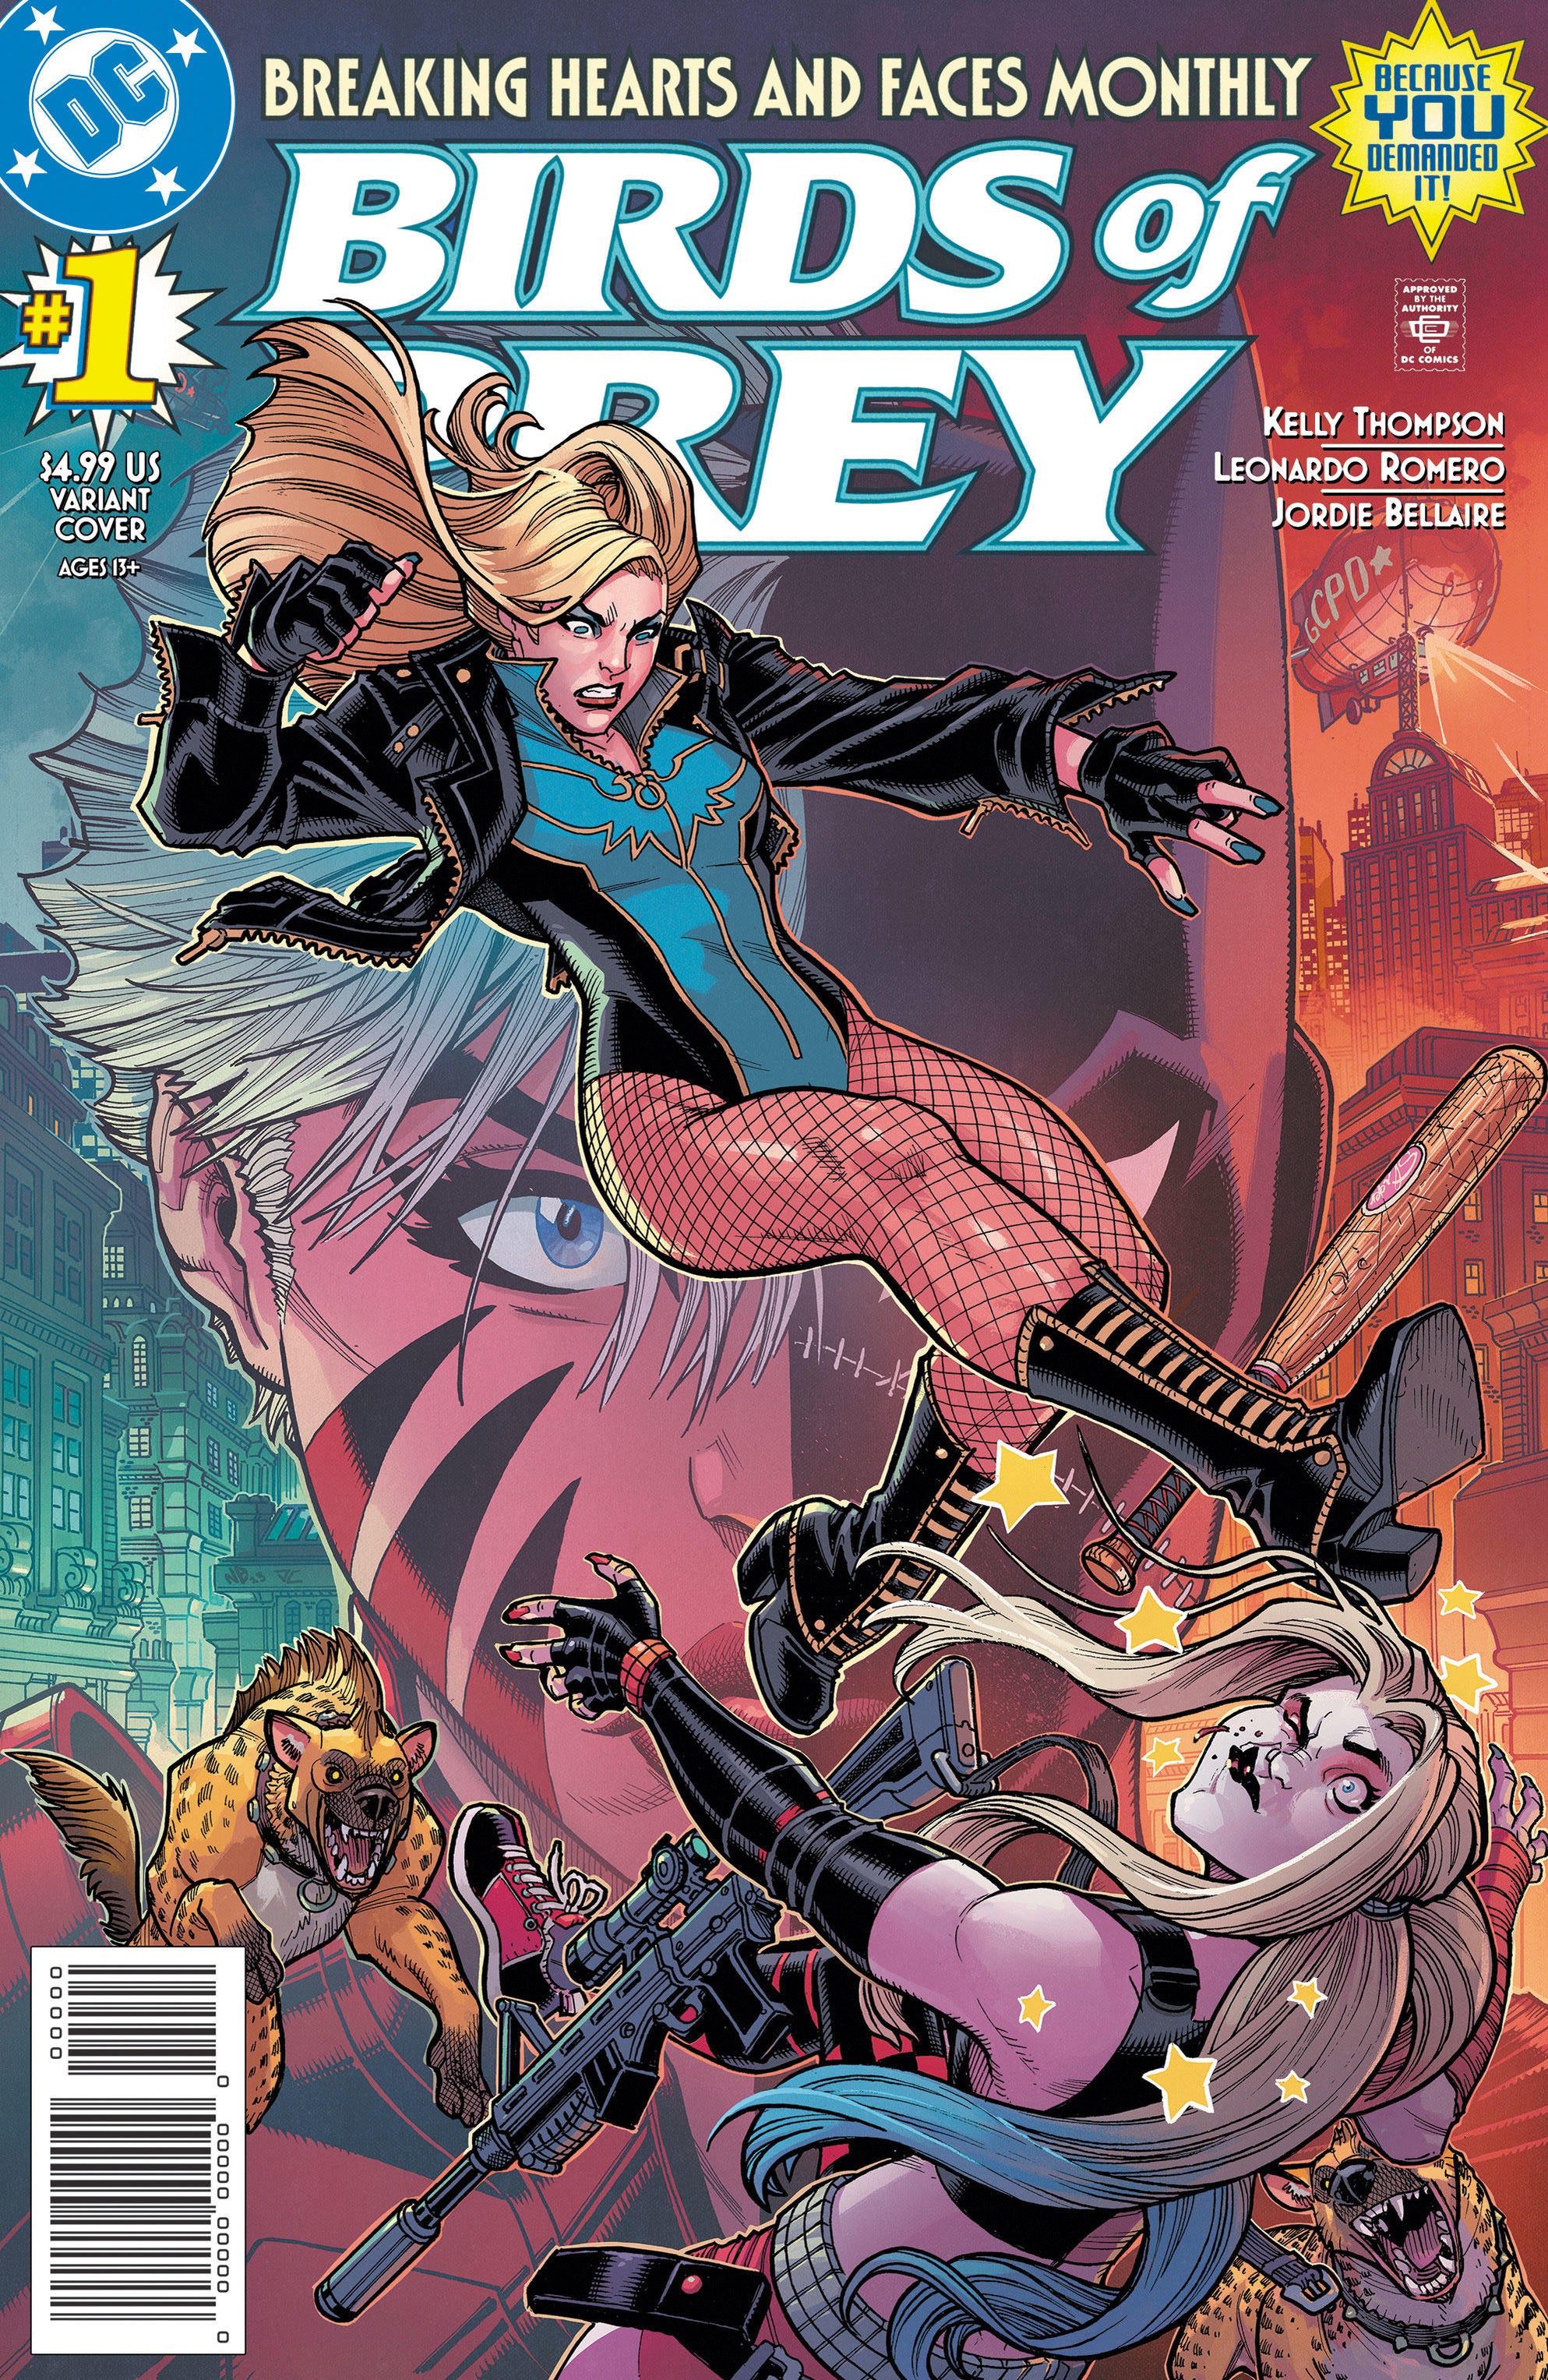 DC Reveals First Look at New Birds of Prey Relaunch